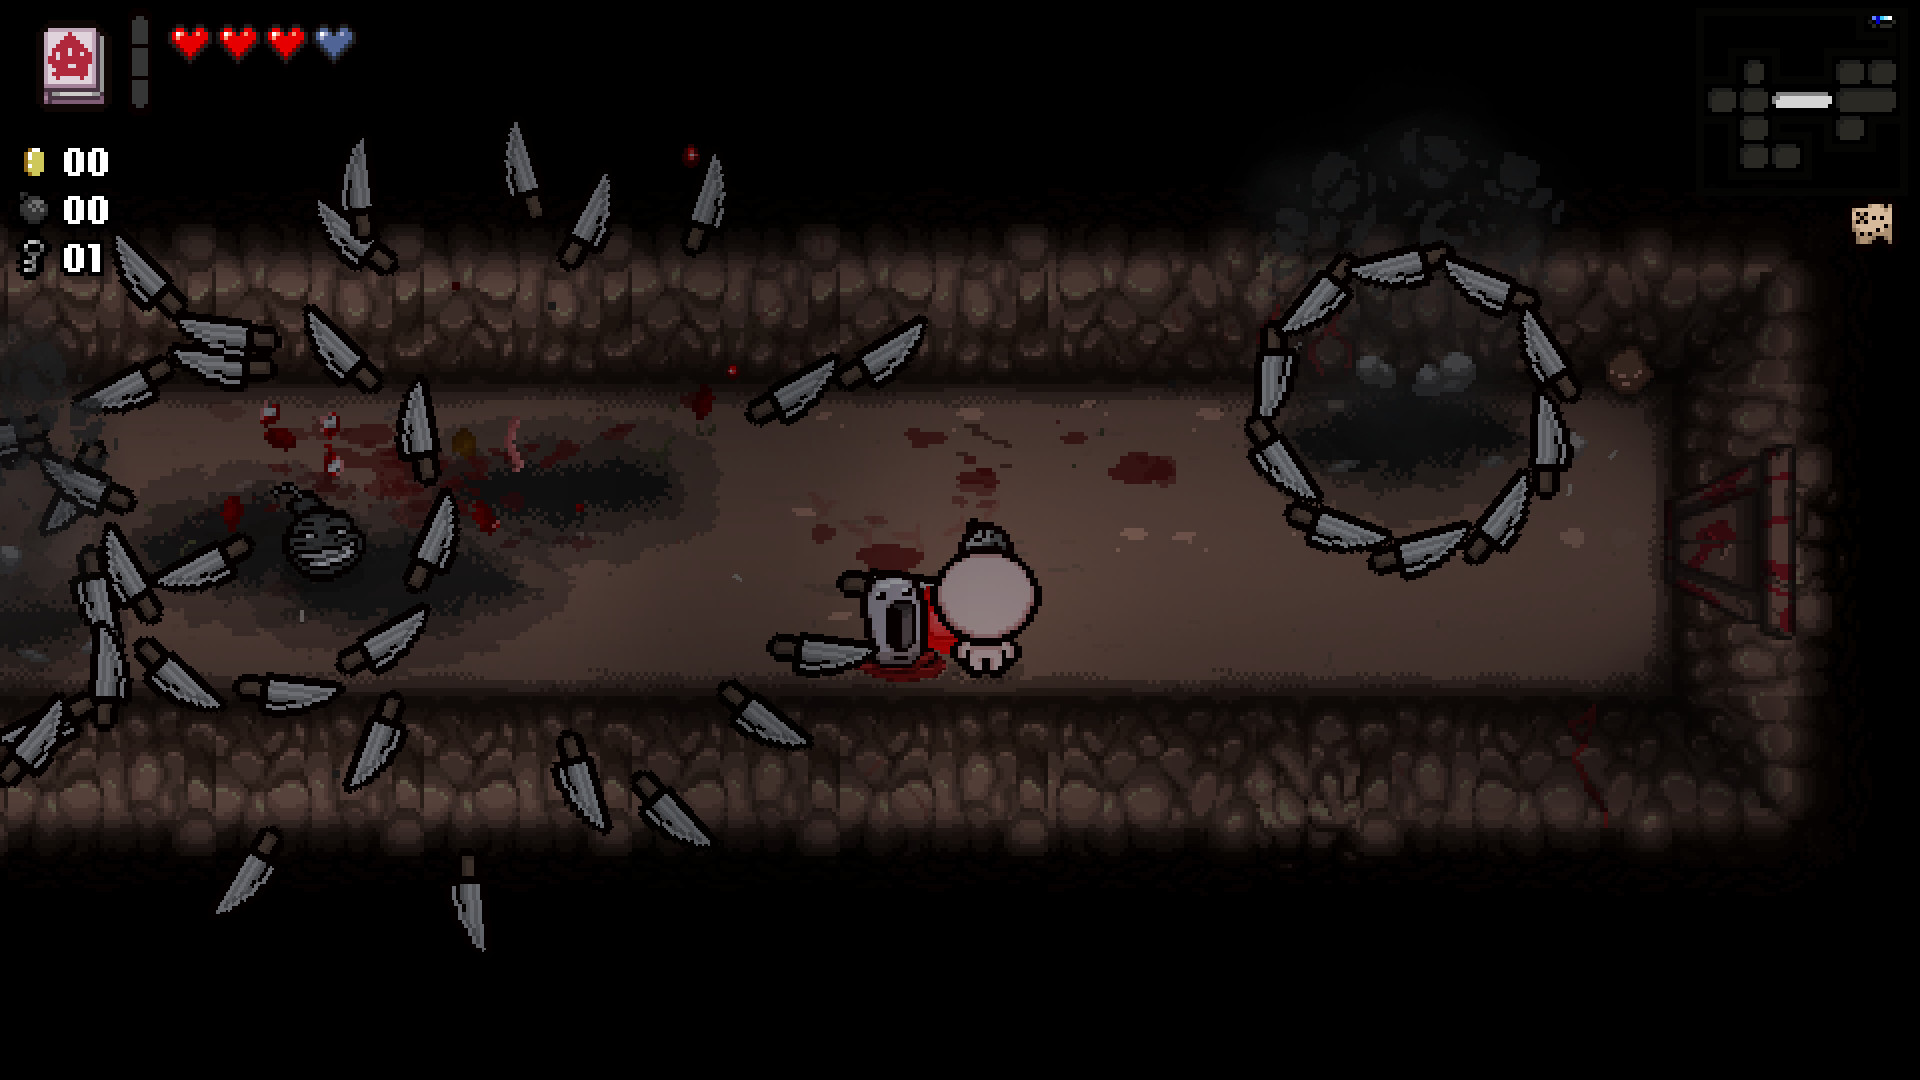 https://www.digitaltrends.com/wp-content/uploads/2017/01/The-Binding-of-Isaac-Afterbirth-Plus.jpg?p=1